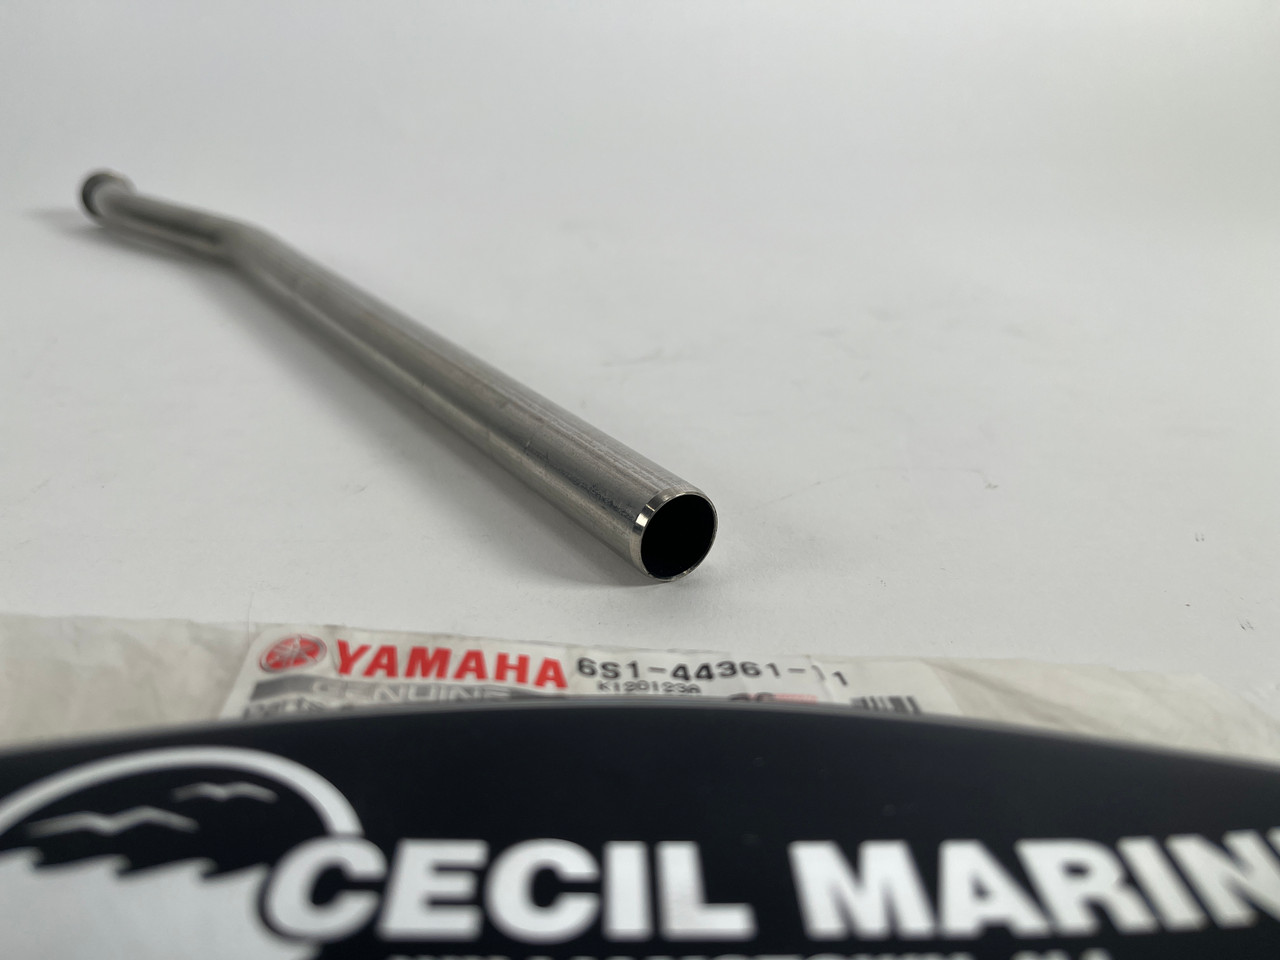 $49.35 GENUINE YAMAHA no tax* 6S1443611200 In Stock And Ready To Ship!